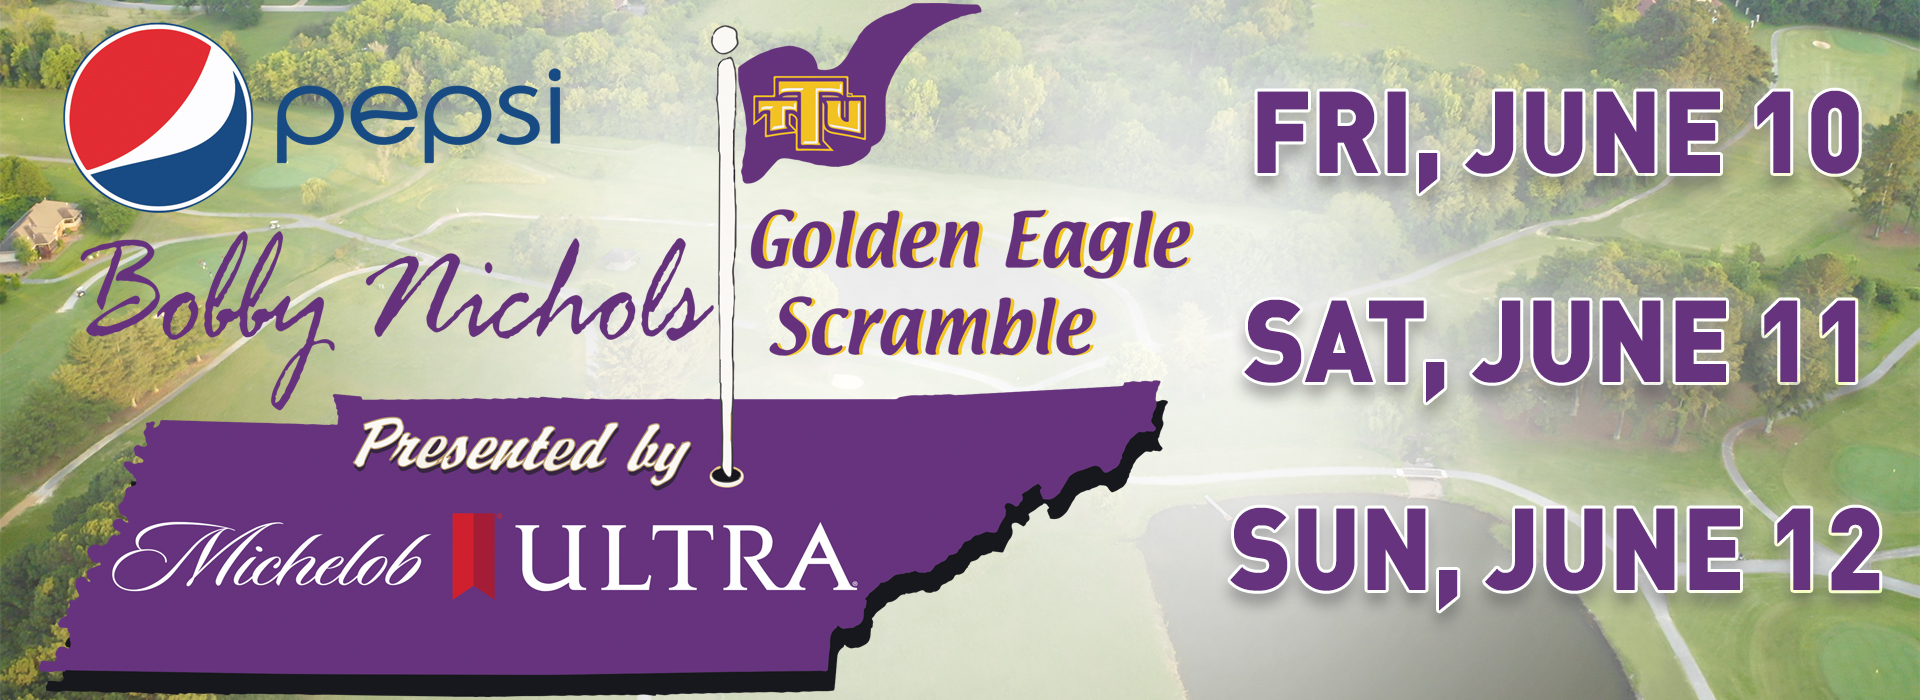 Save the date – Pepsi Golden Eagle Scramble presented by Michelob Ultra set for June 10-12